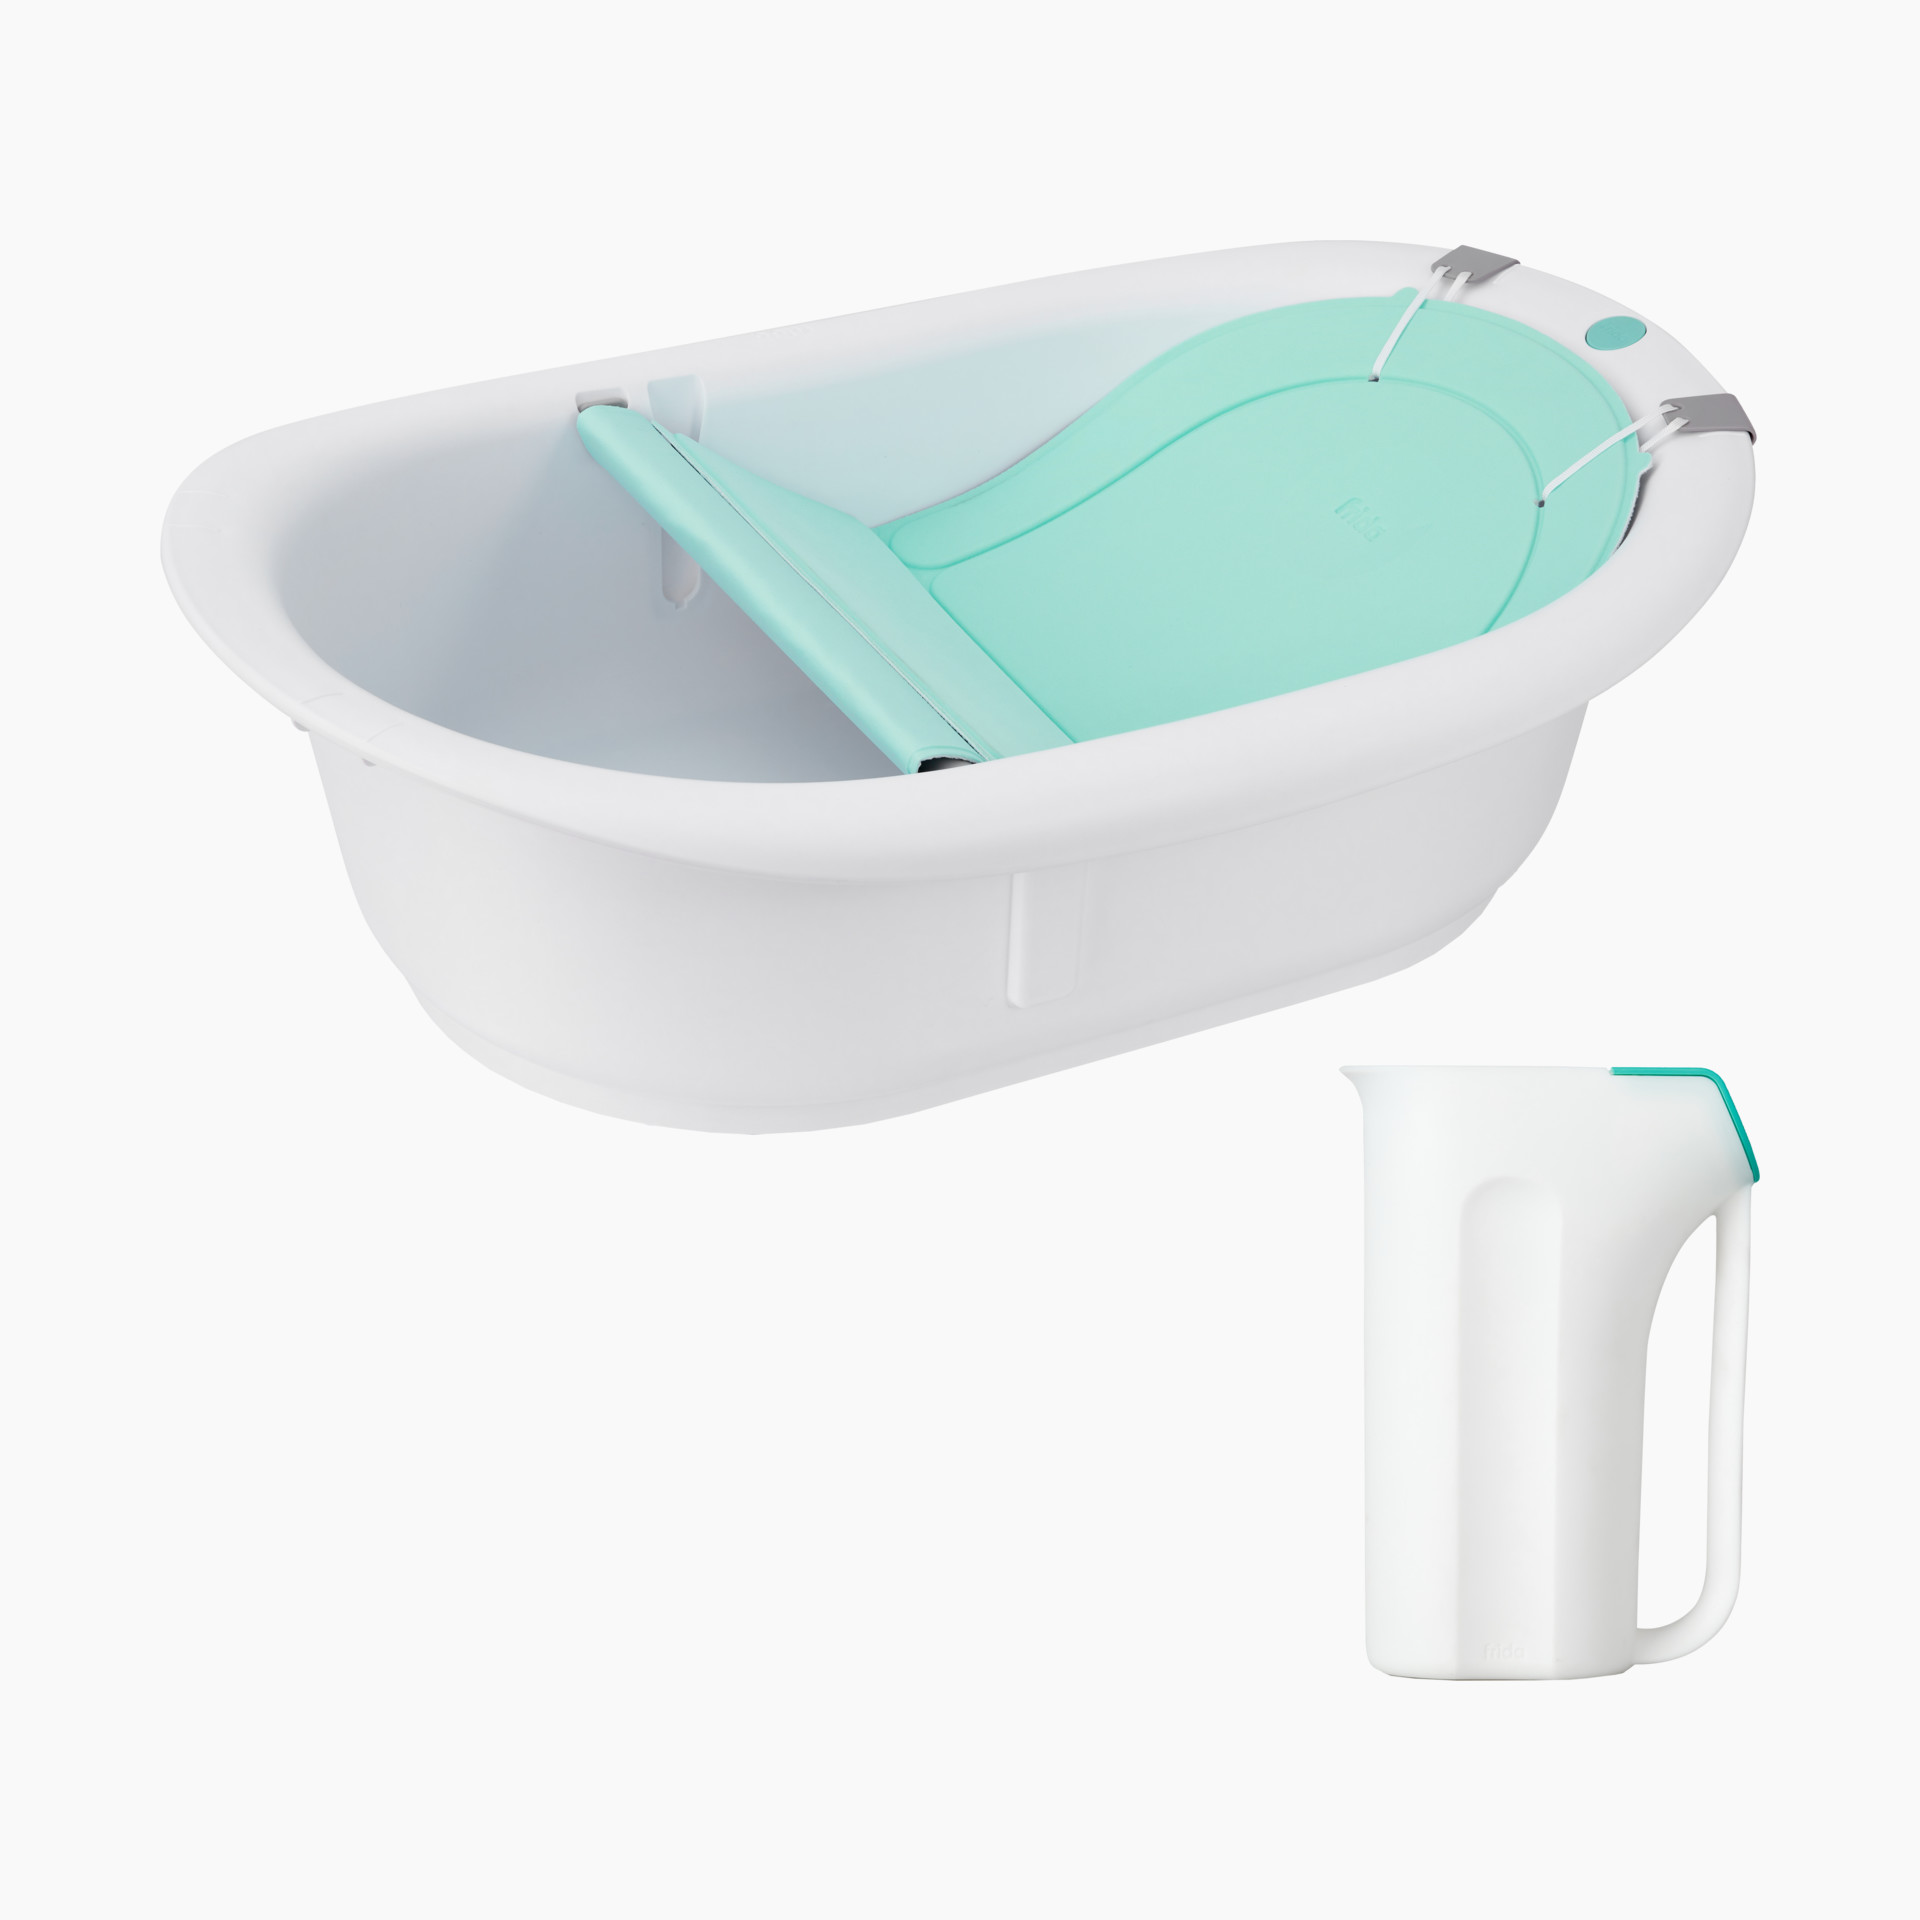 Fridababy Bath Tub, Grow With Me 4 In 1